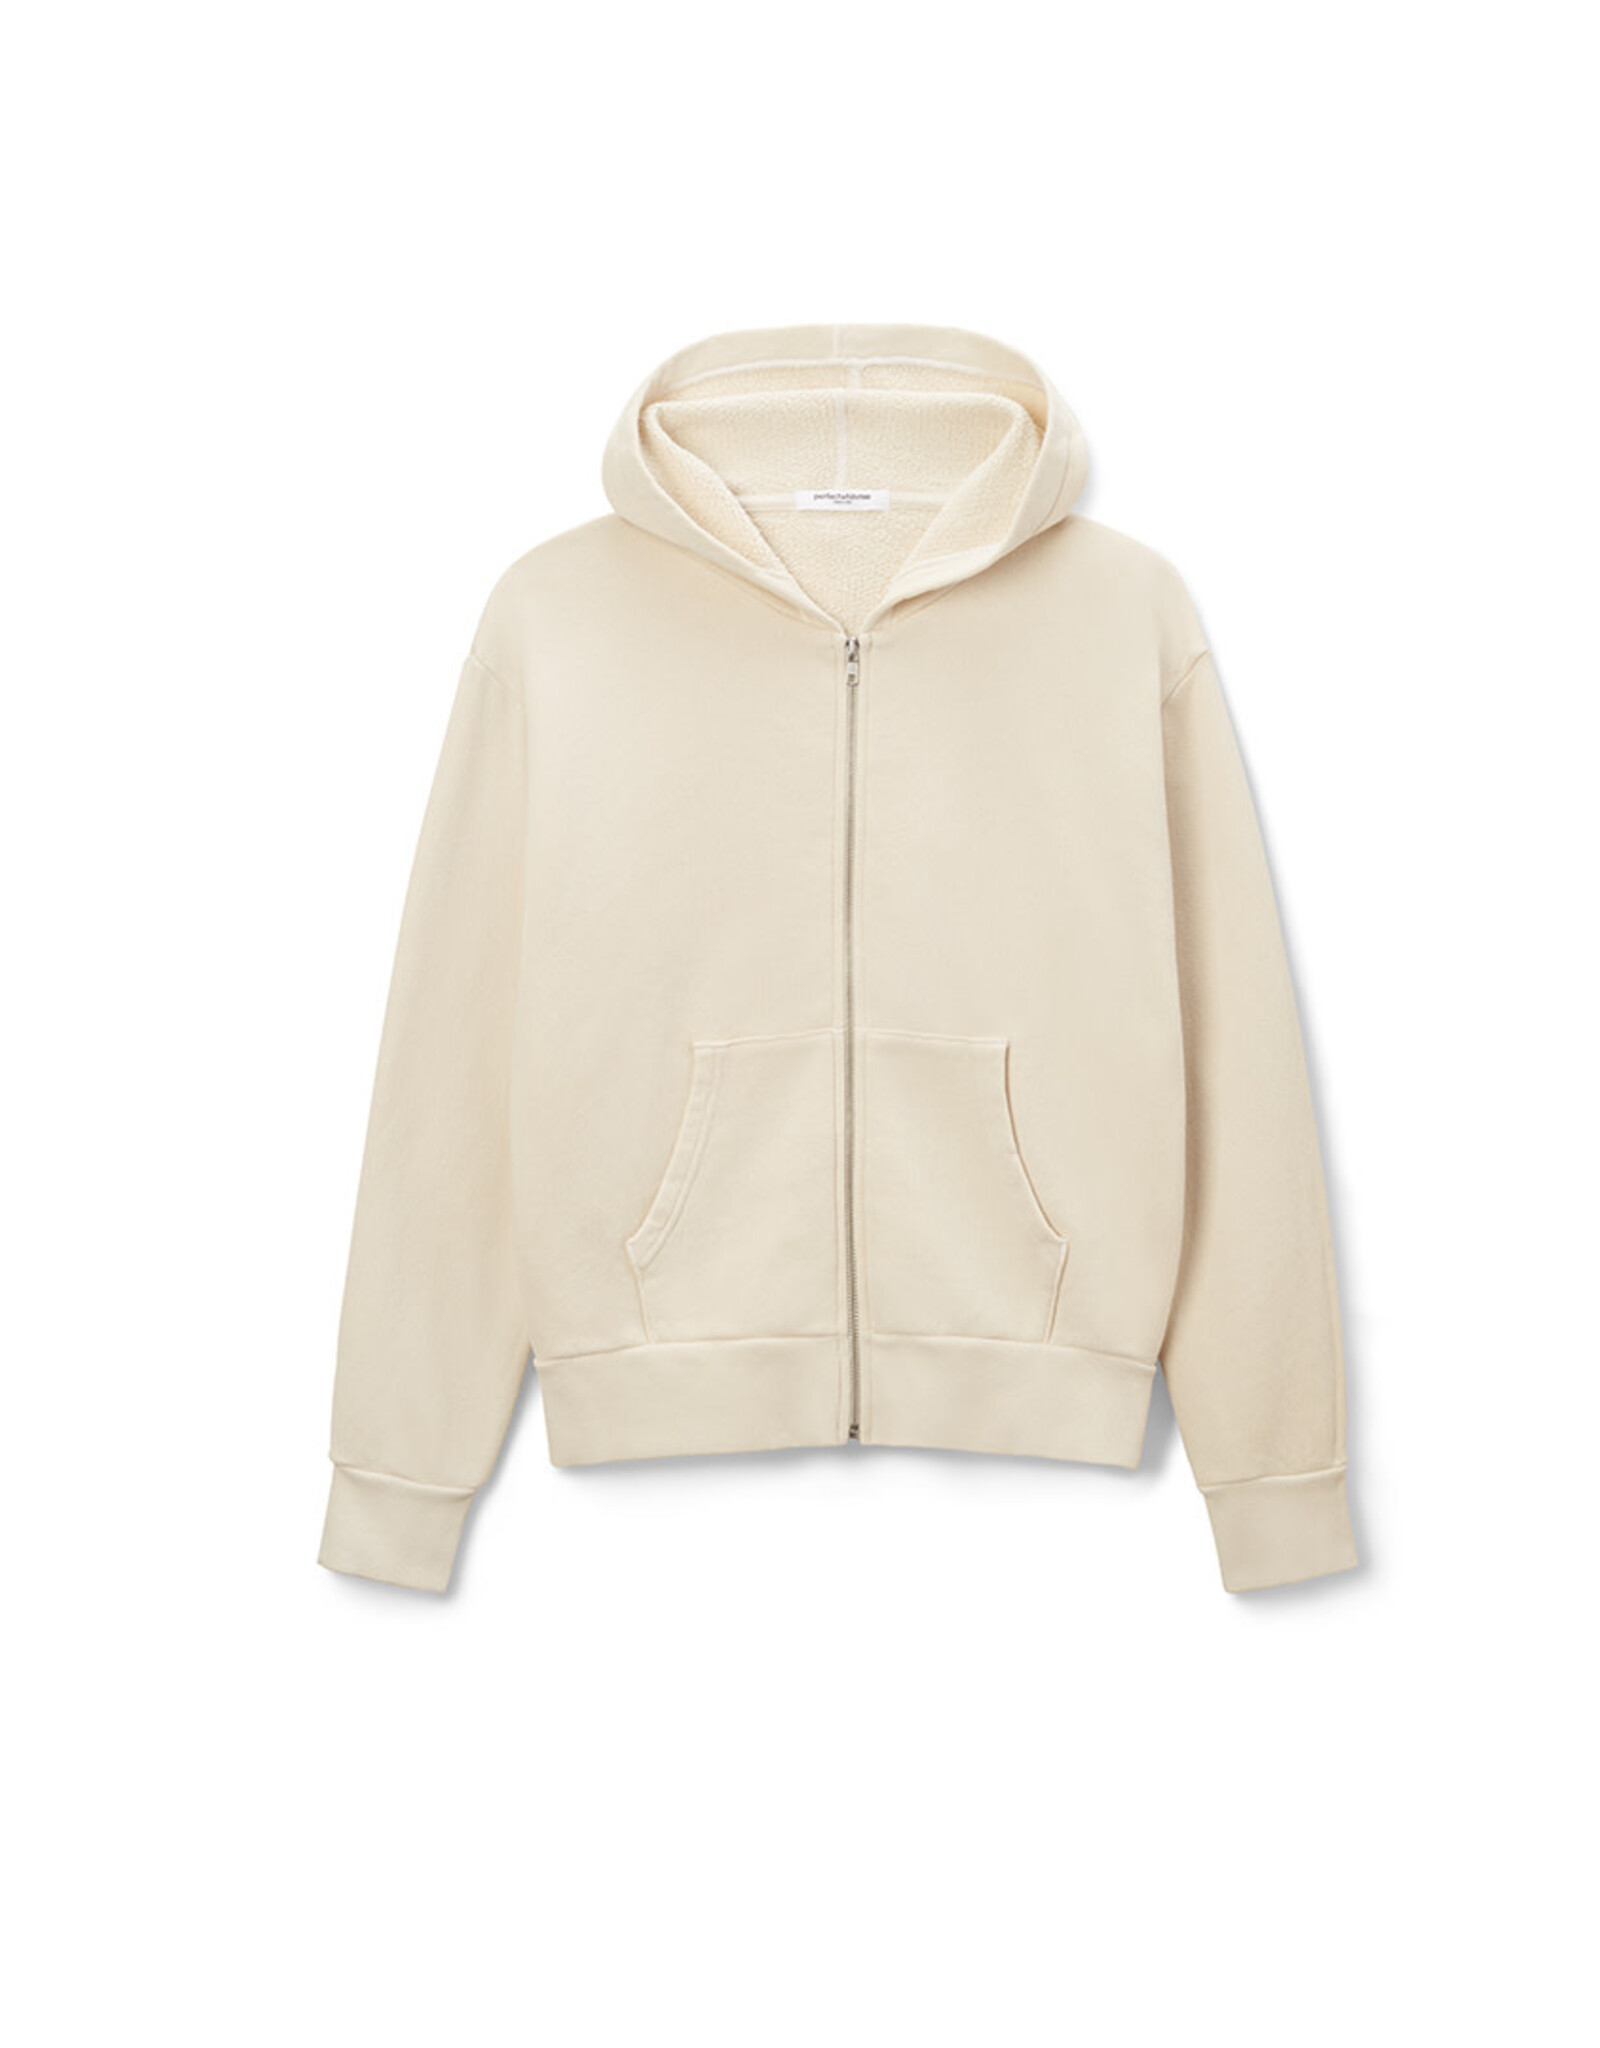 PeRFECT WHITE TEE PWT Patti Zip-Up Hooide